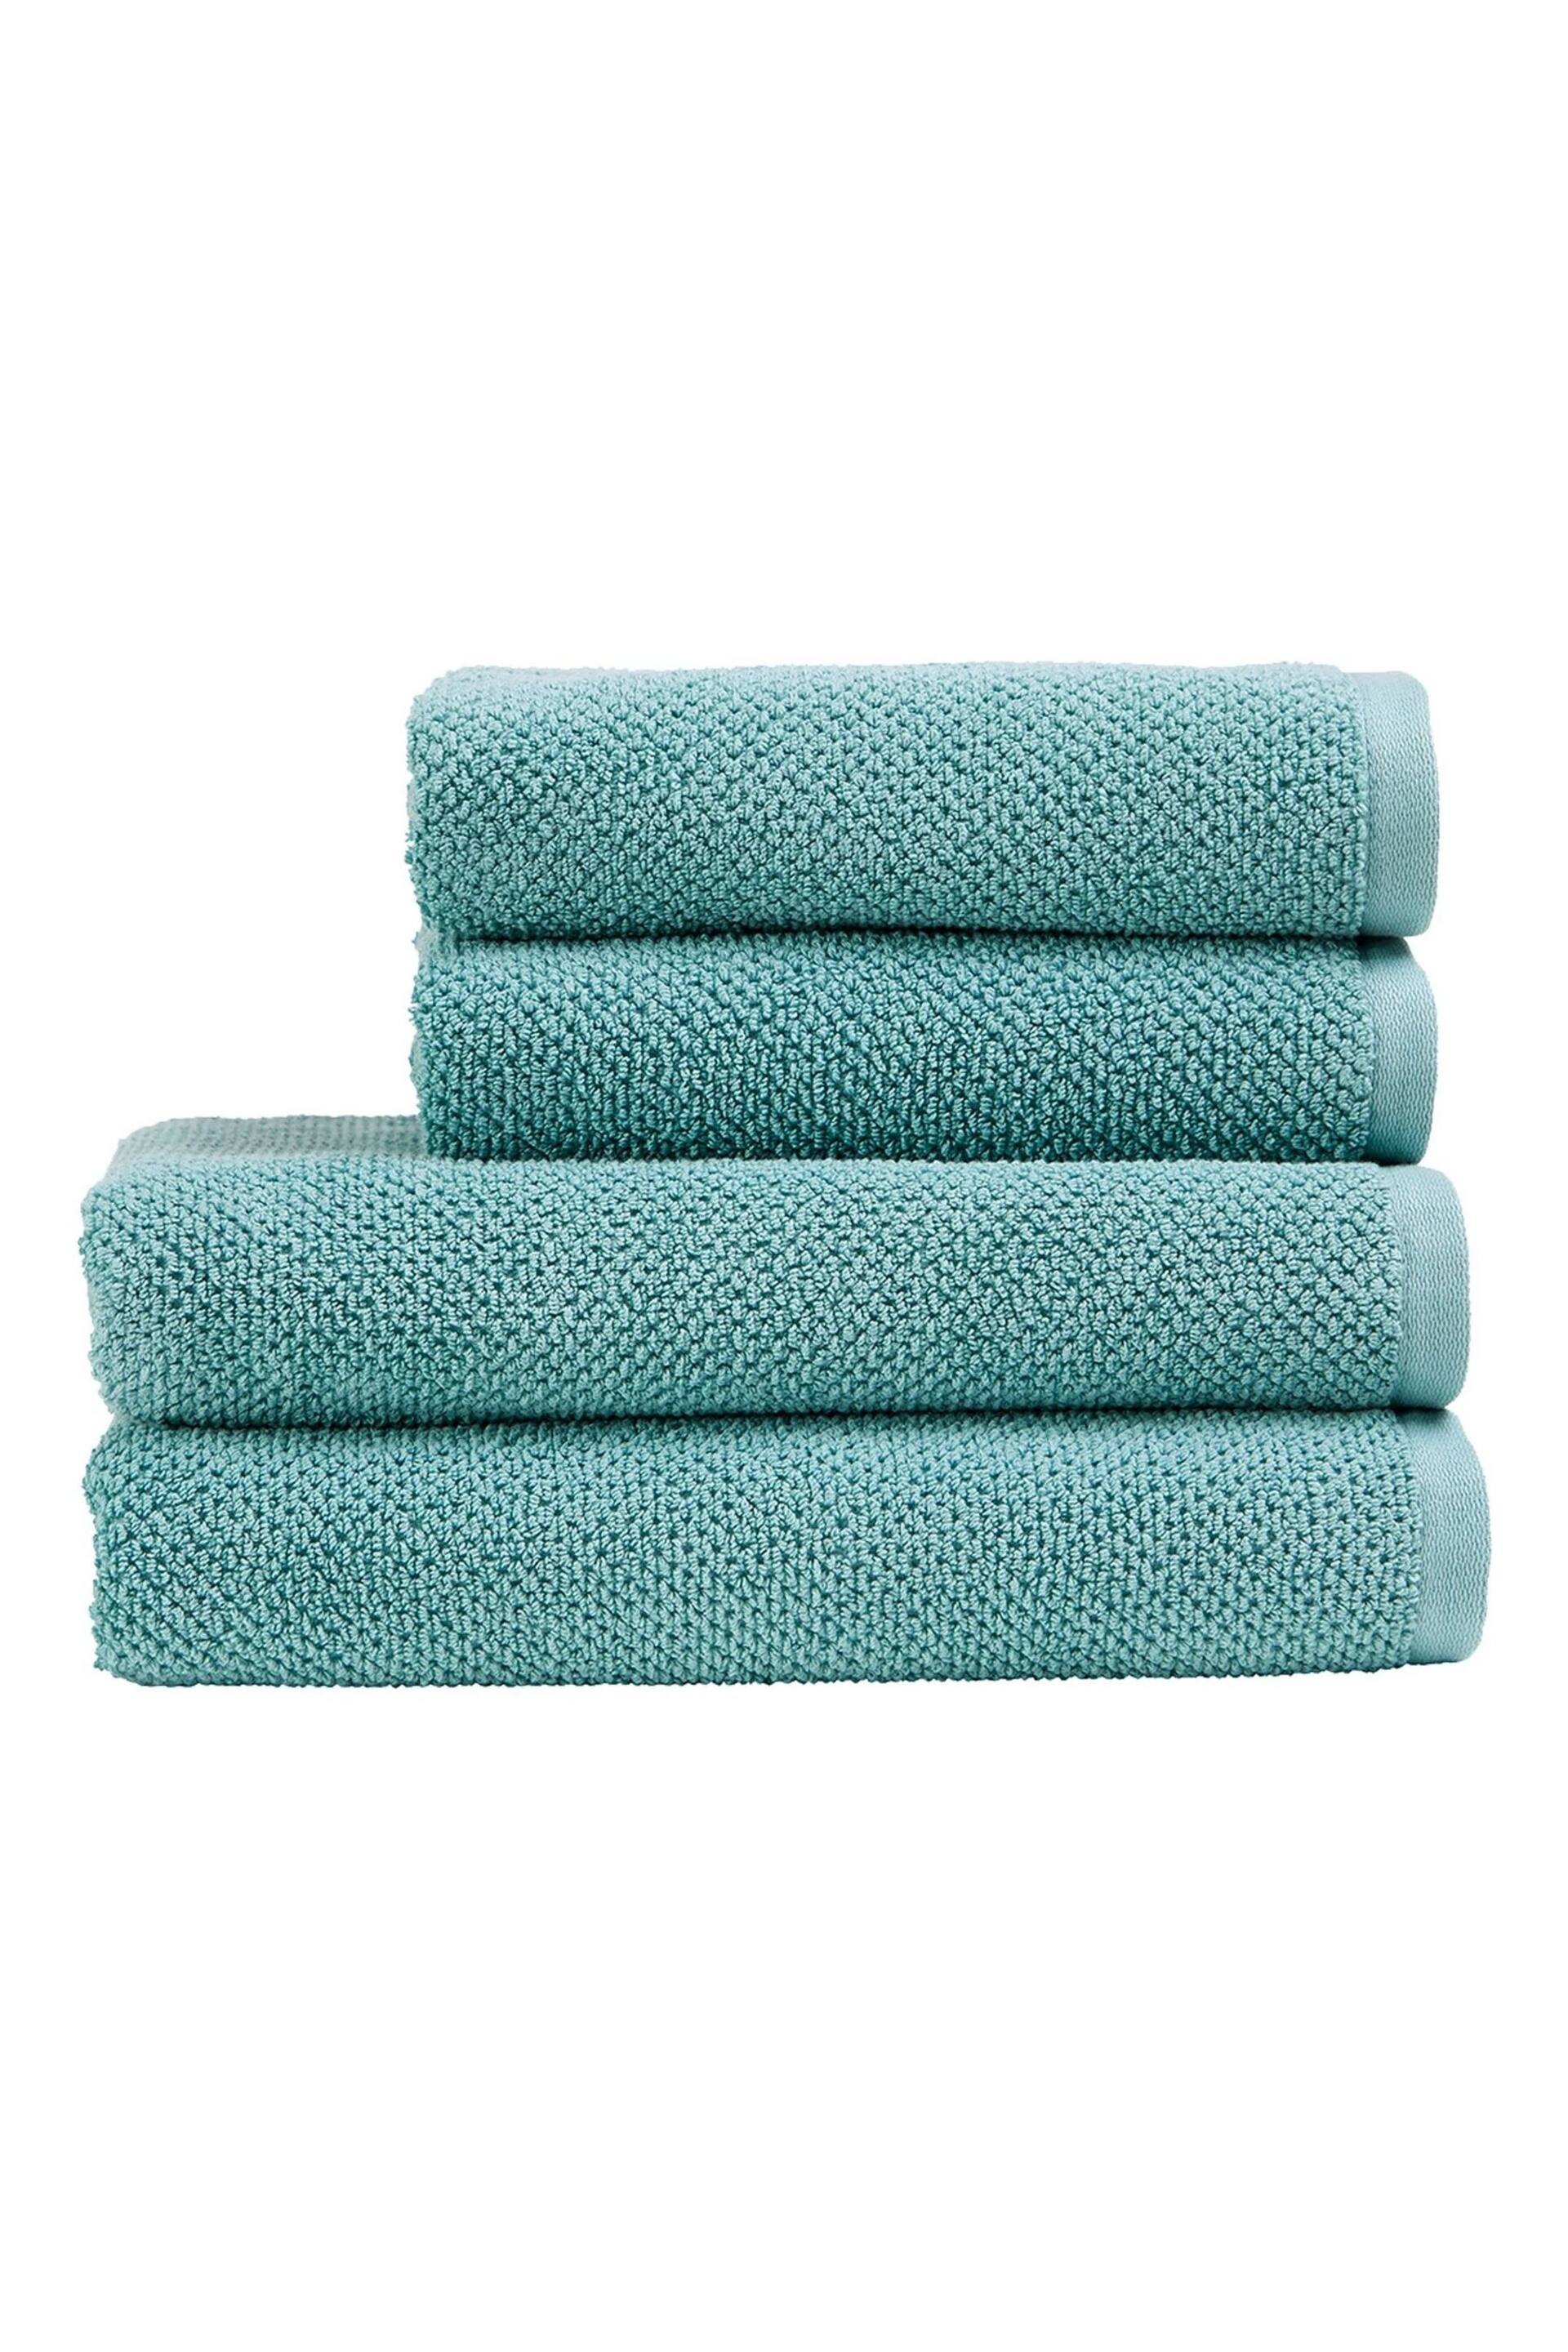 Christy Green Brixton - 600 GSM Cotton Textured Bath Towel - Image 3 of 4